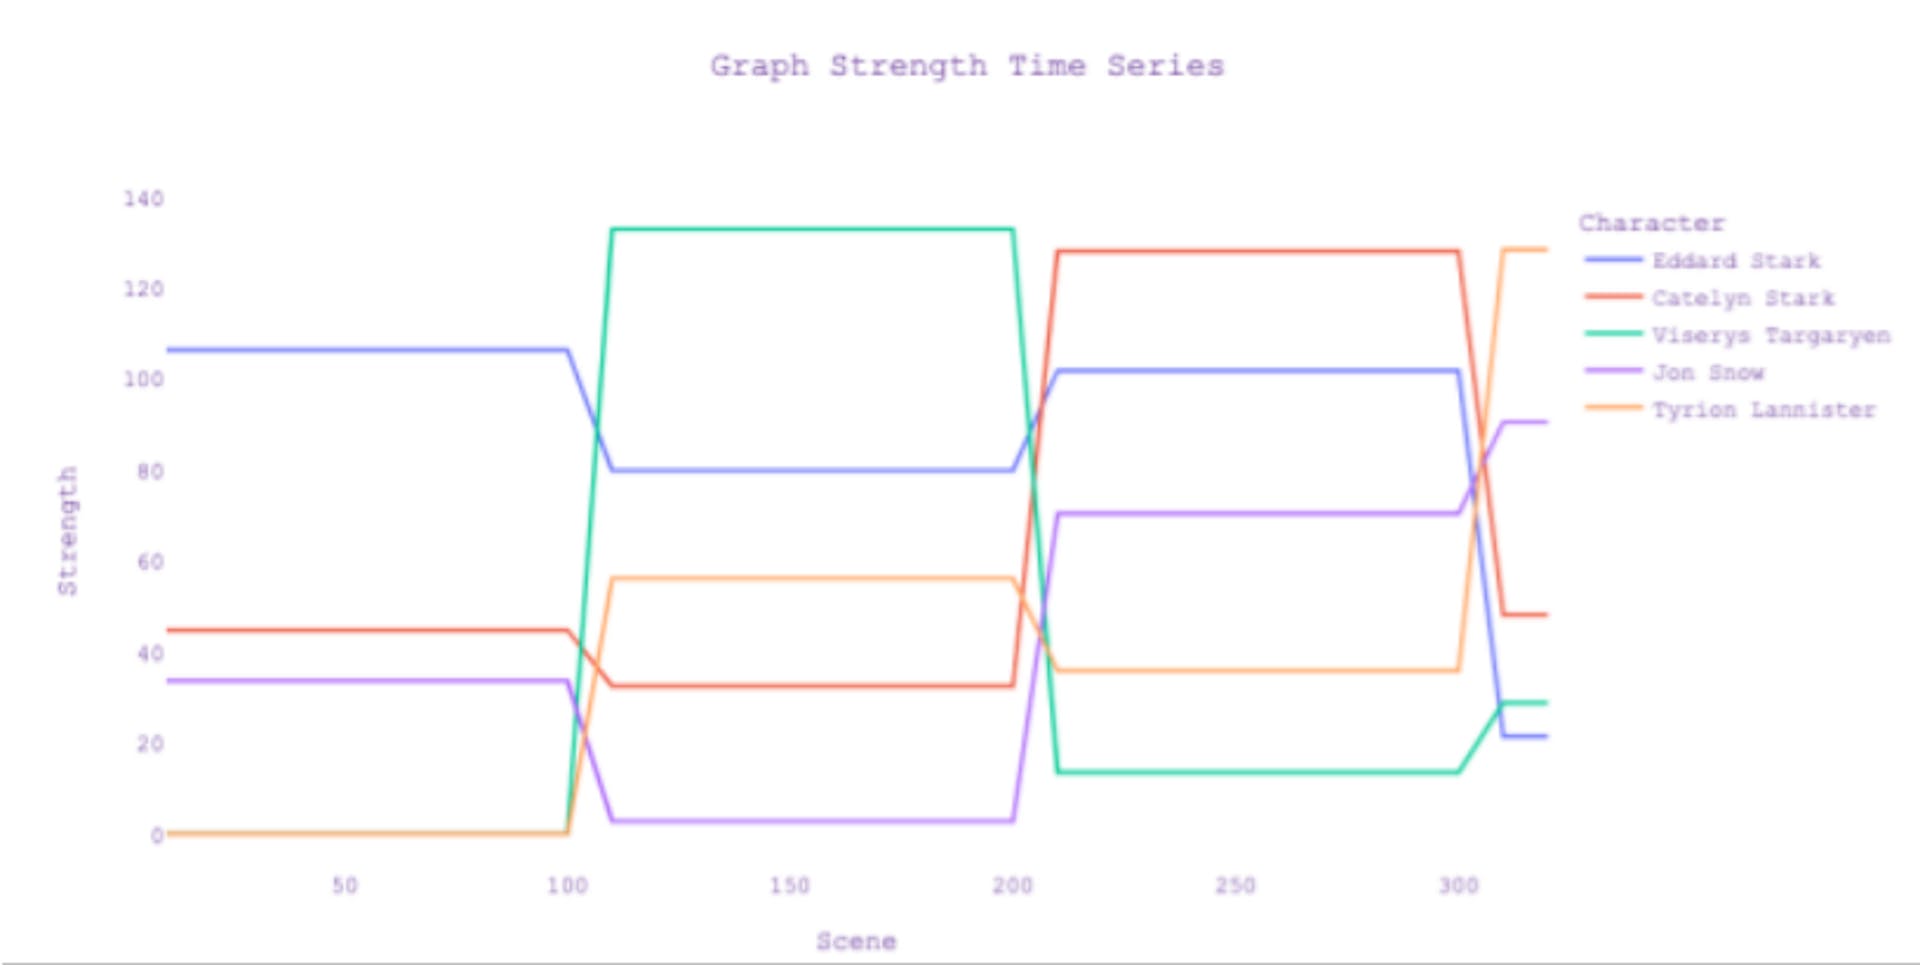 Fig. 5. Time series for top 5 highest graph node strength characters from Game of Thrones Episode 1.